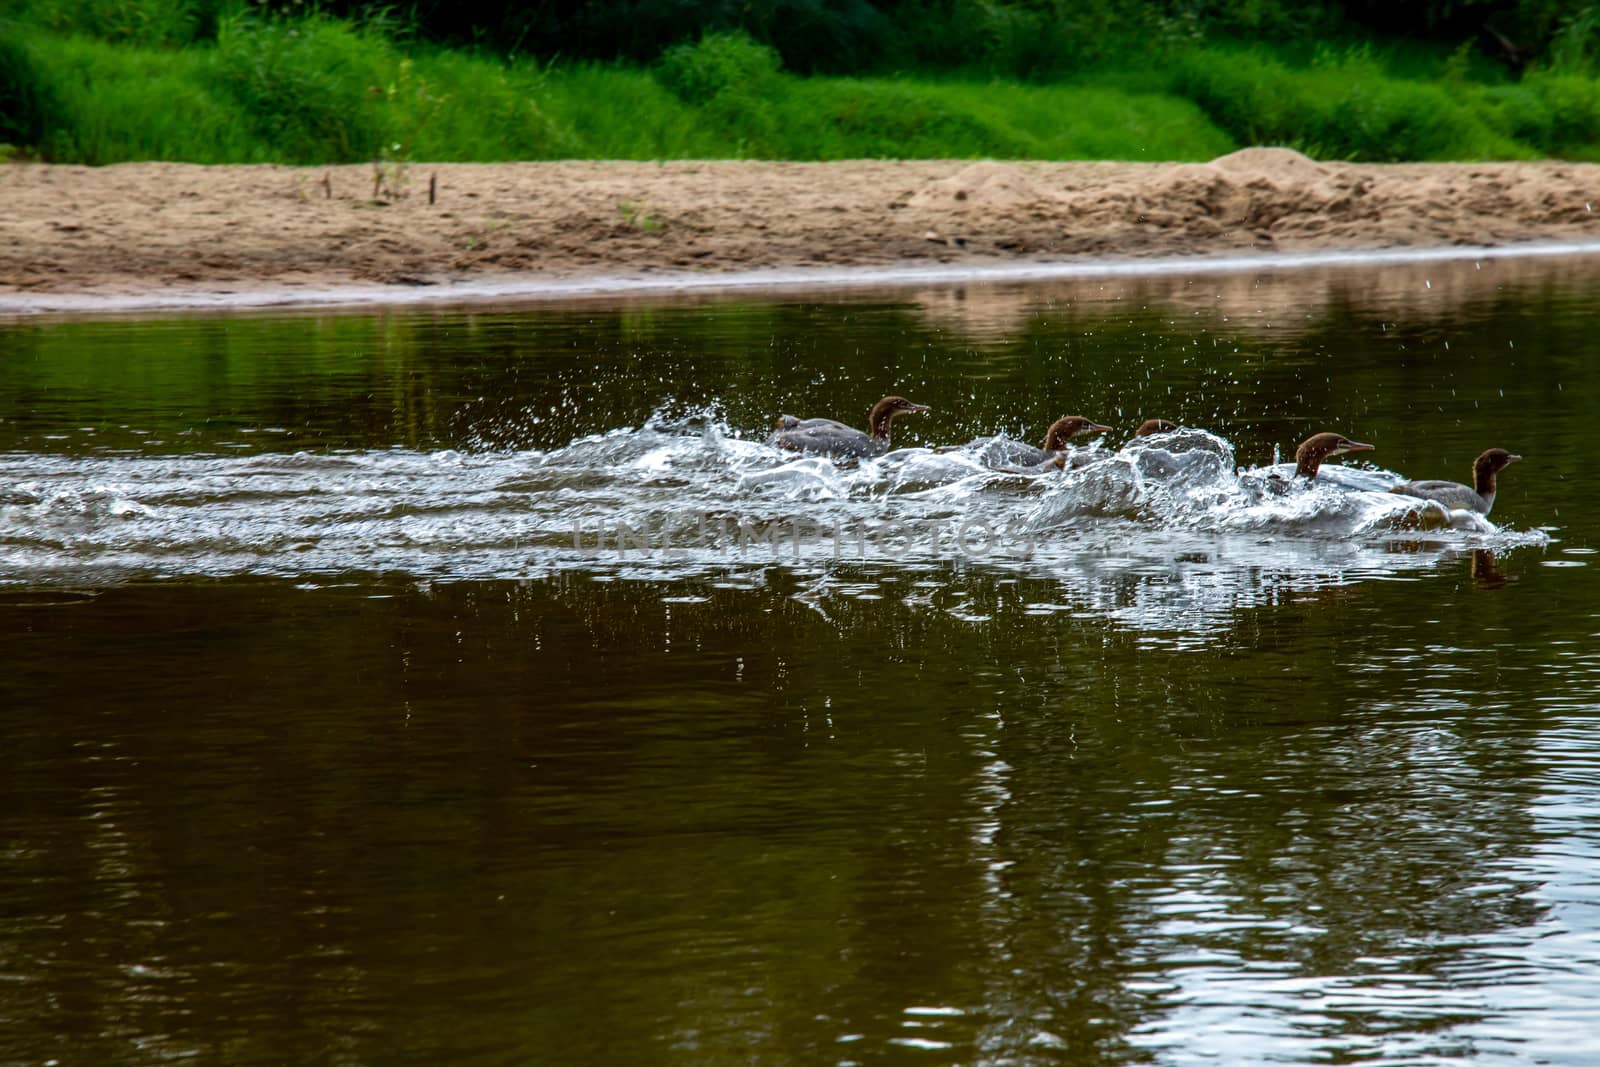 Ducks swimming in the river in Latvia. by fotorobs